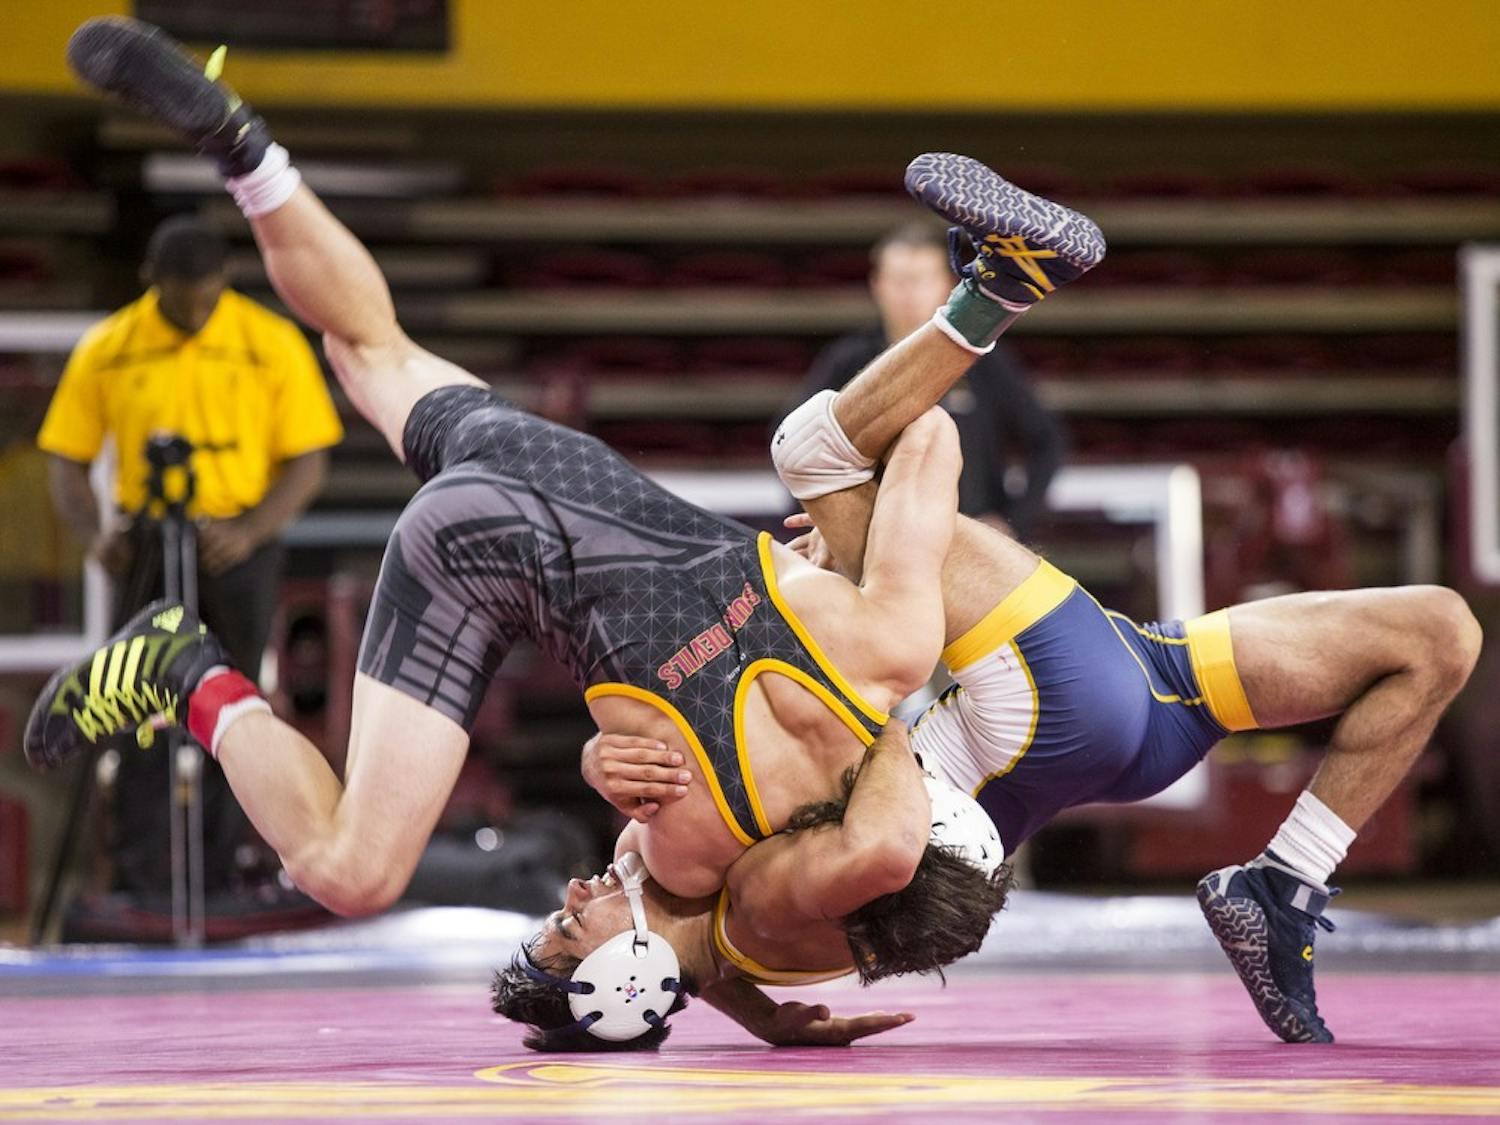 ASU's Robbie Mathers, left, flips around UNC's Sonny Espinoza in a 141-pound matchup during a meet against the University of Northern Colorado at Wells Fargo Arena in Tempe on Thursday, Nov. 12, 2015. The Sun Devils took down the UNC Bears 21-14.